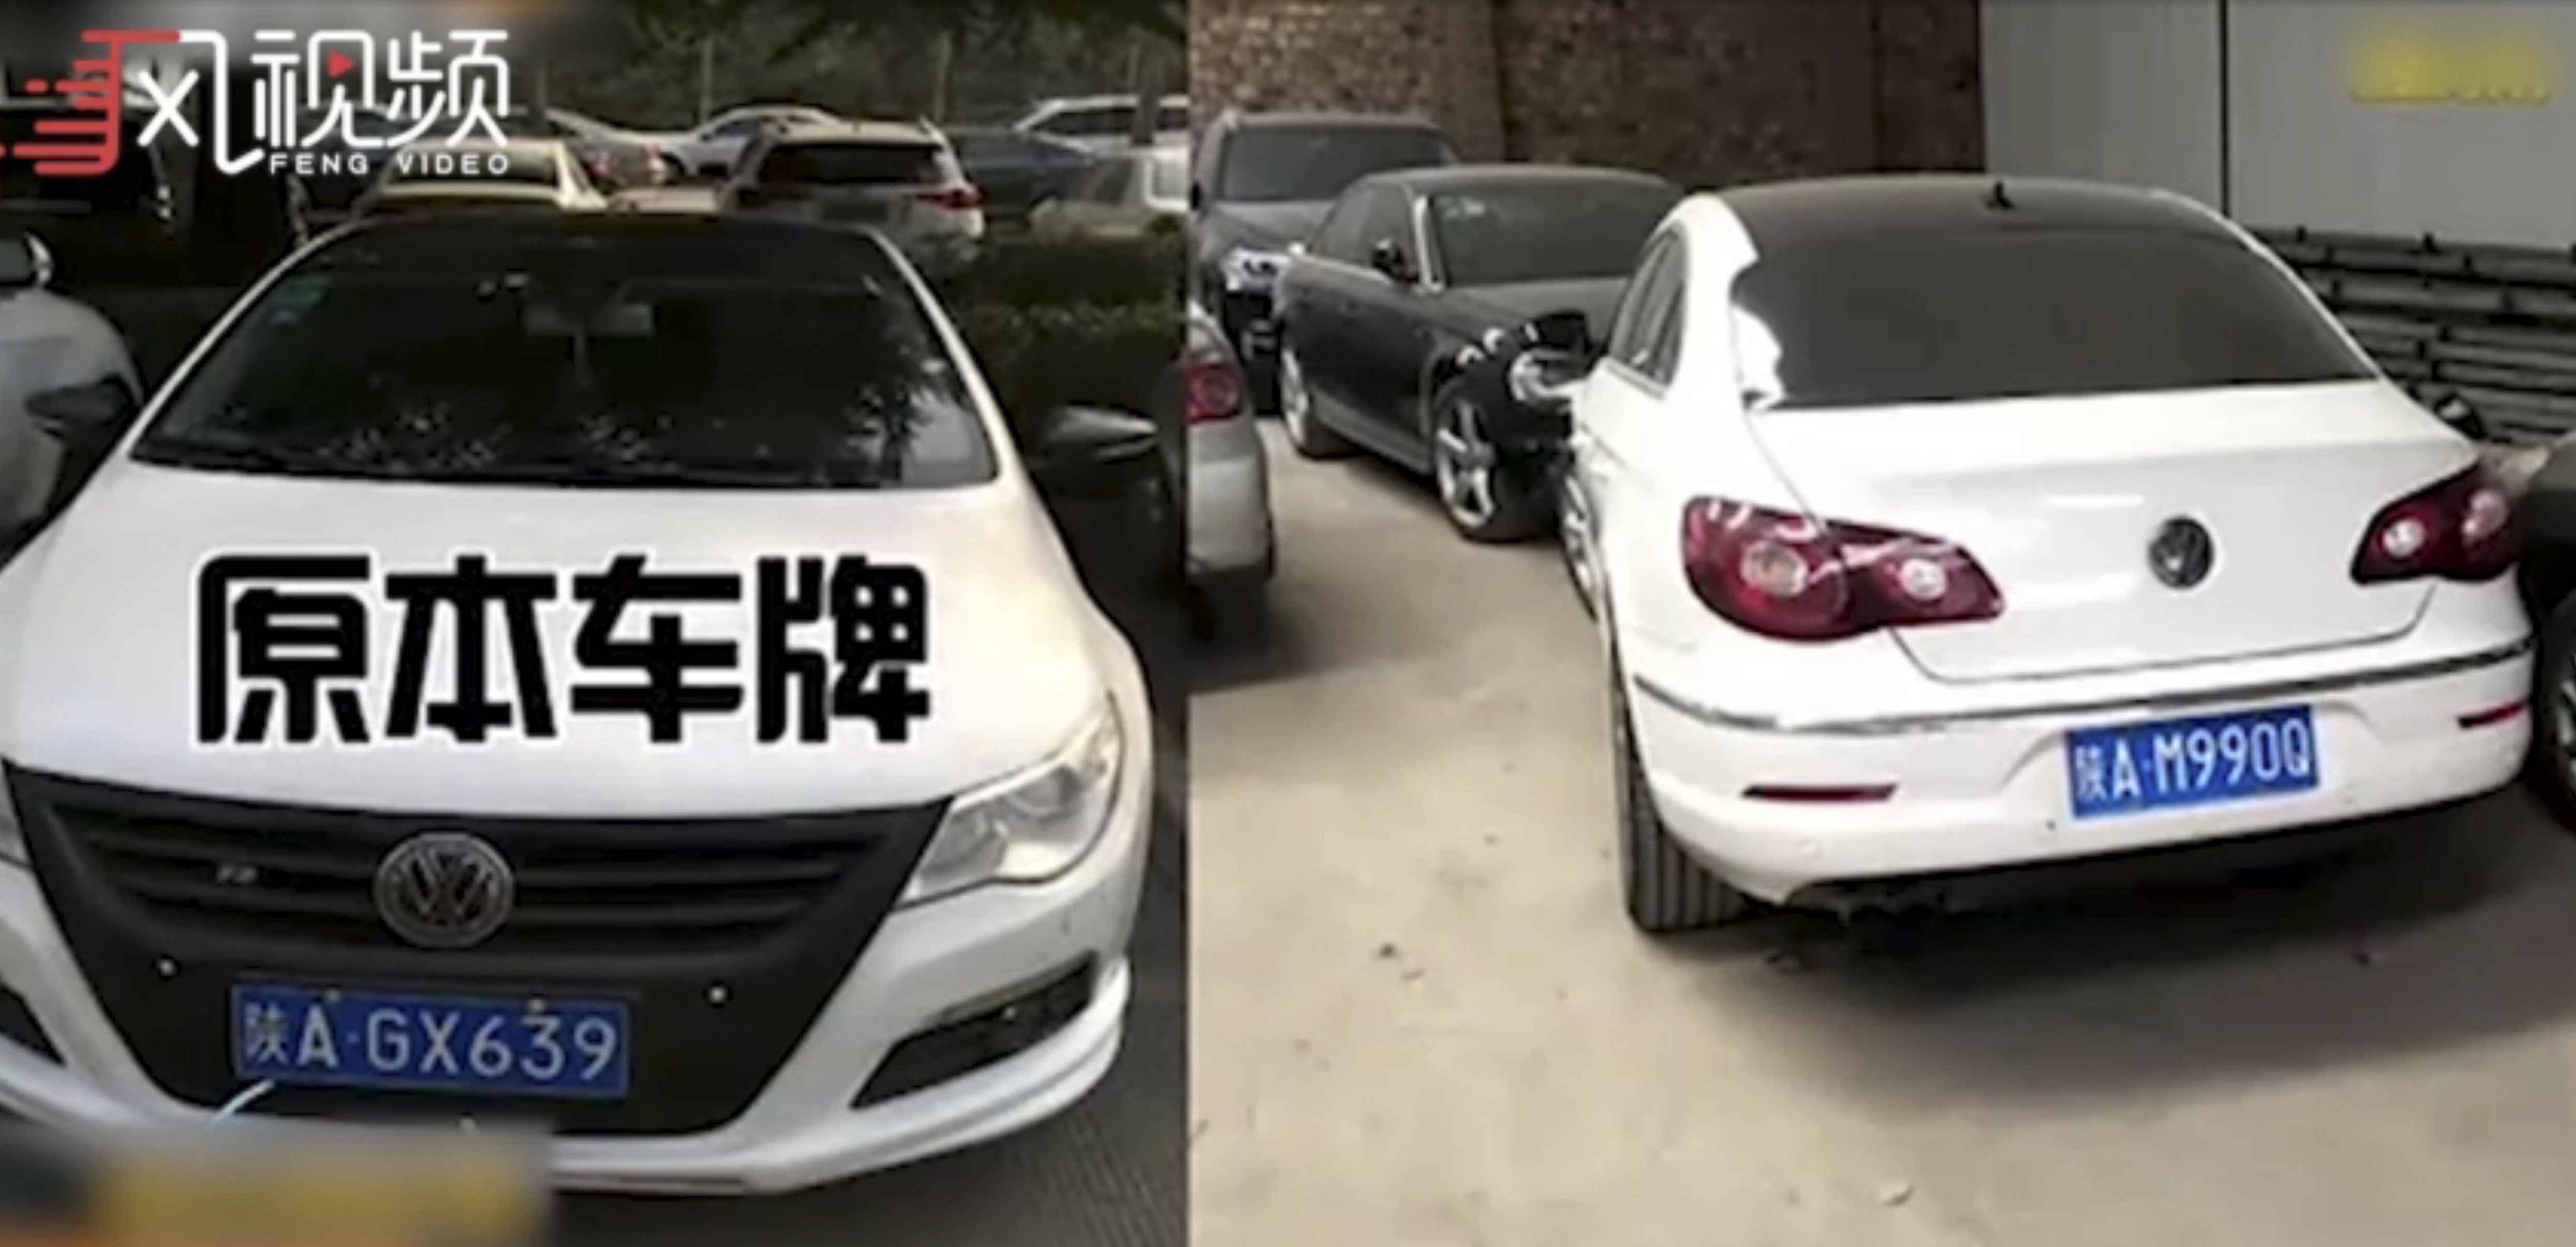 A man in northwest China was reunited with his car more than two years after it was stolen from a police station car park. Photo: News.sina.com.cn